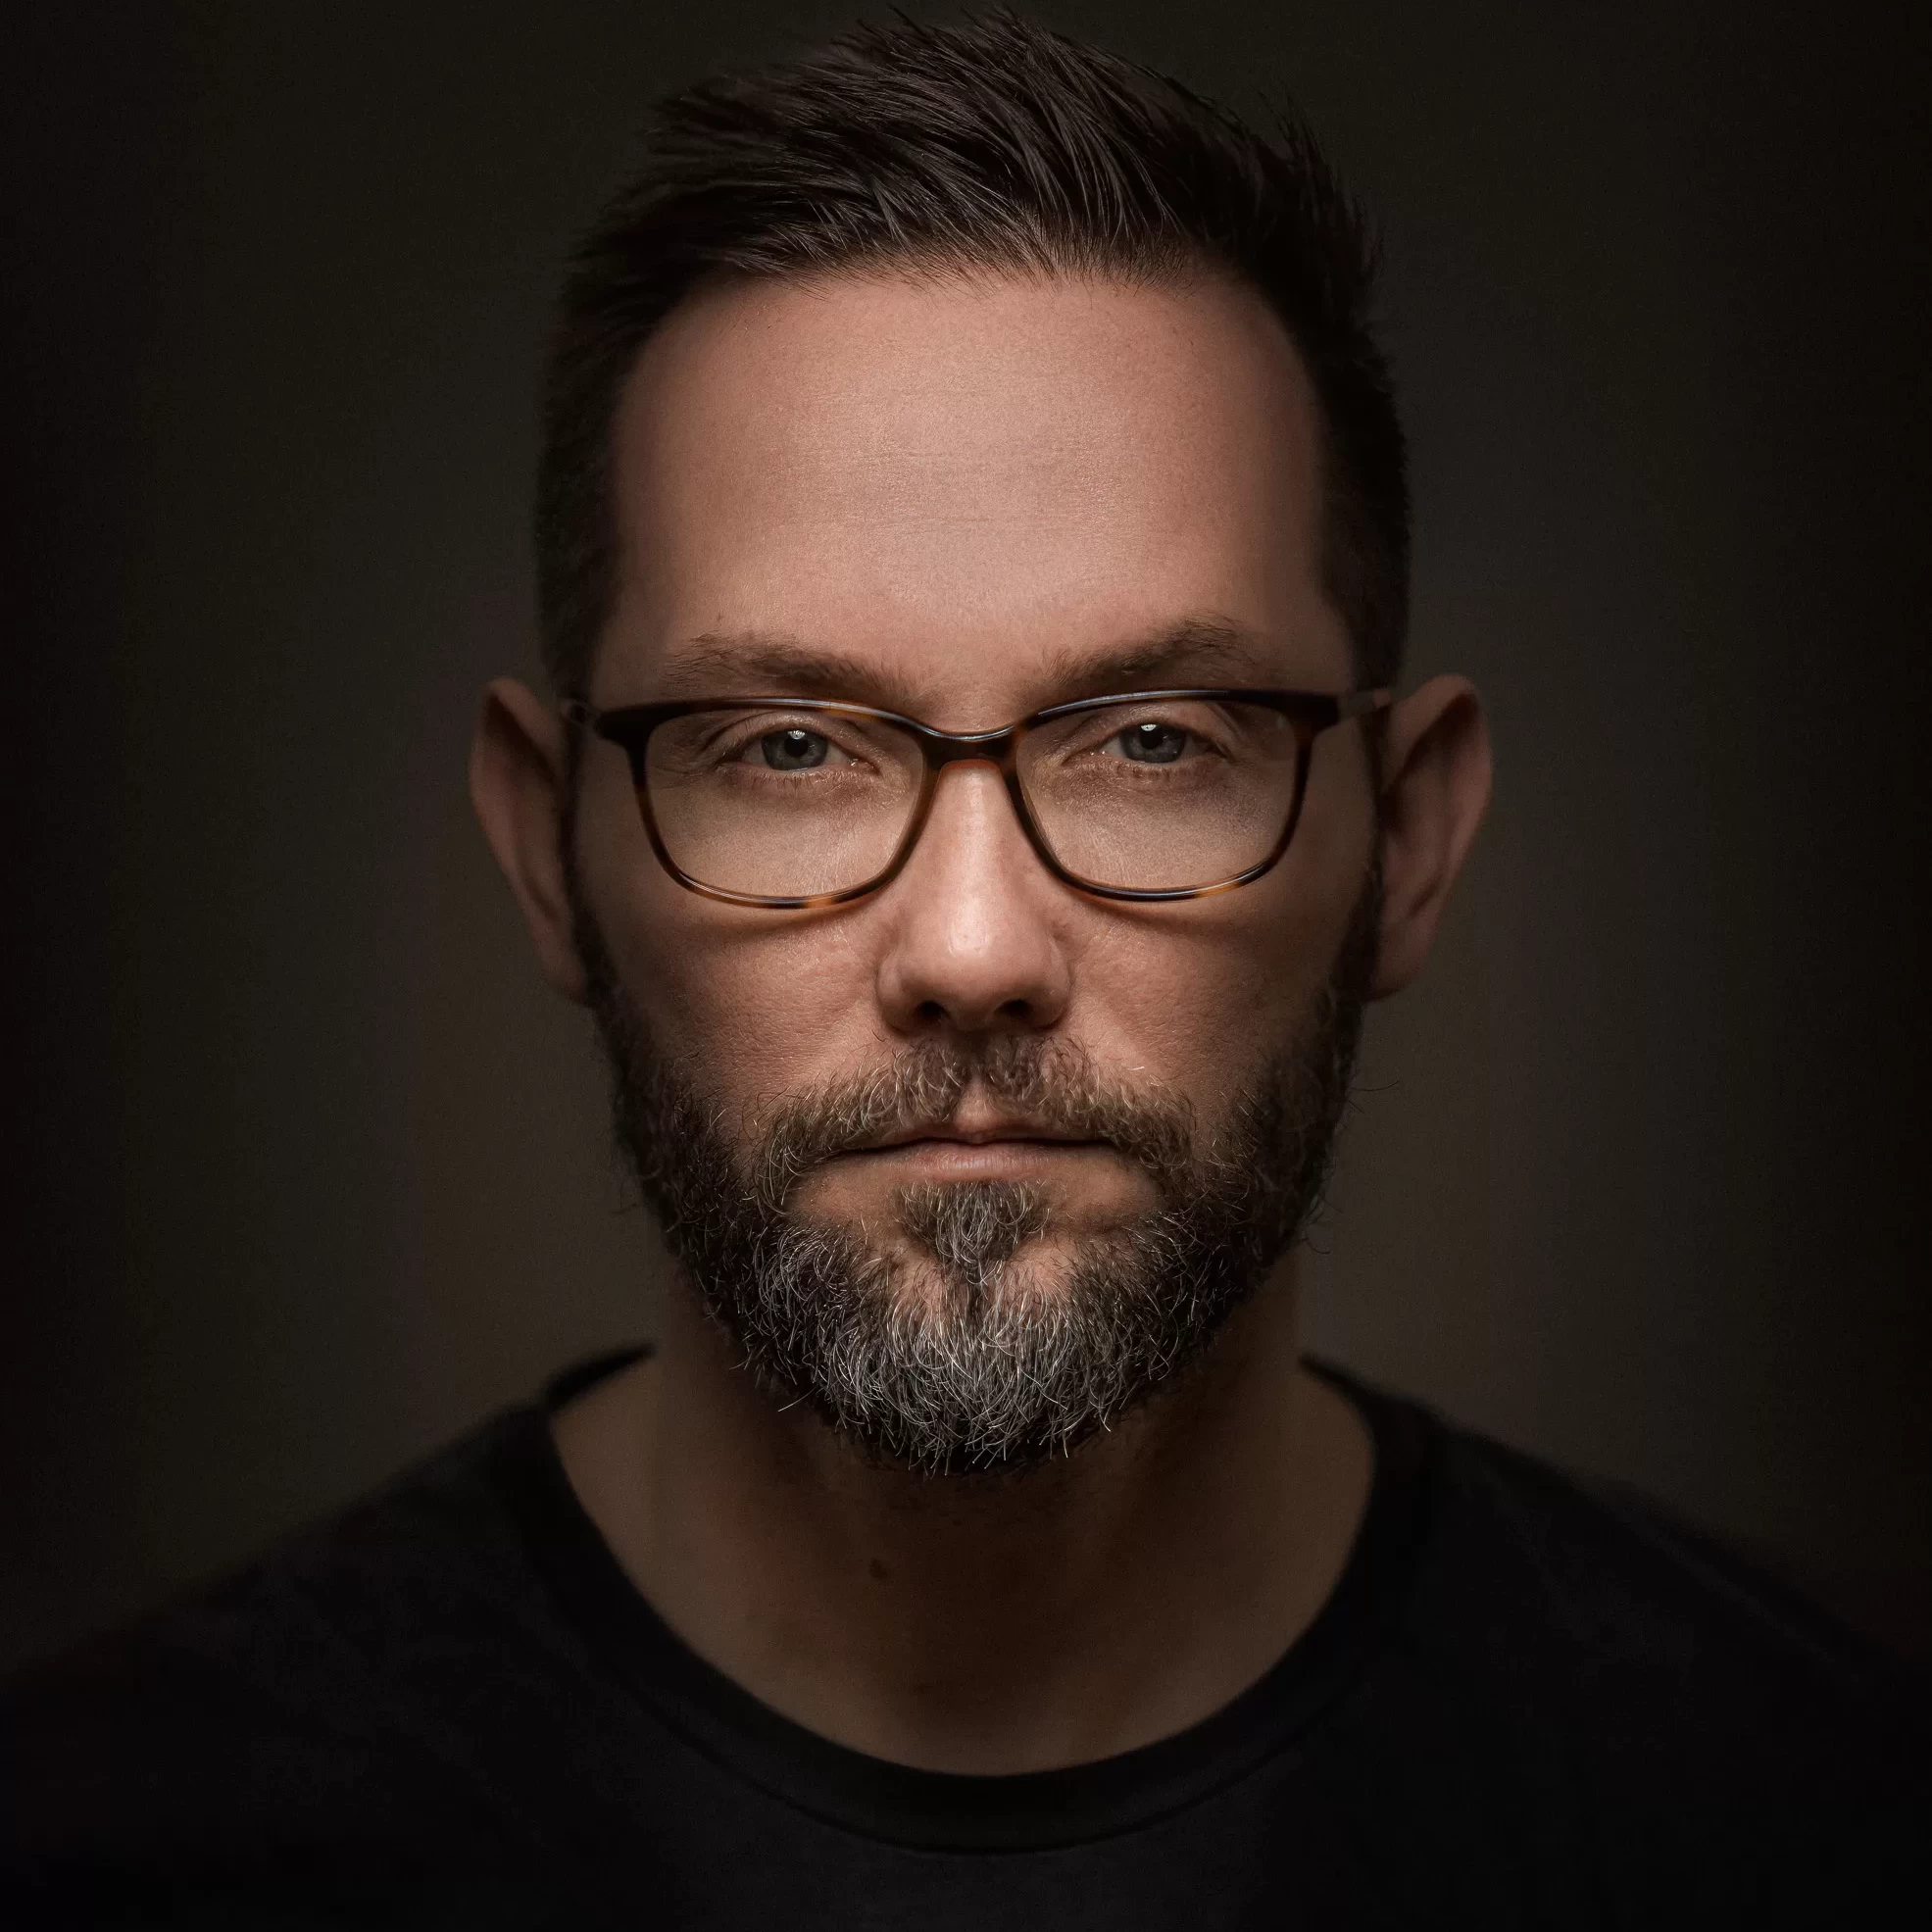 A man with glasses and a beard in front of a dark background for a company headshot.